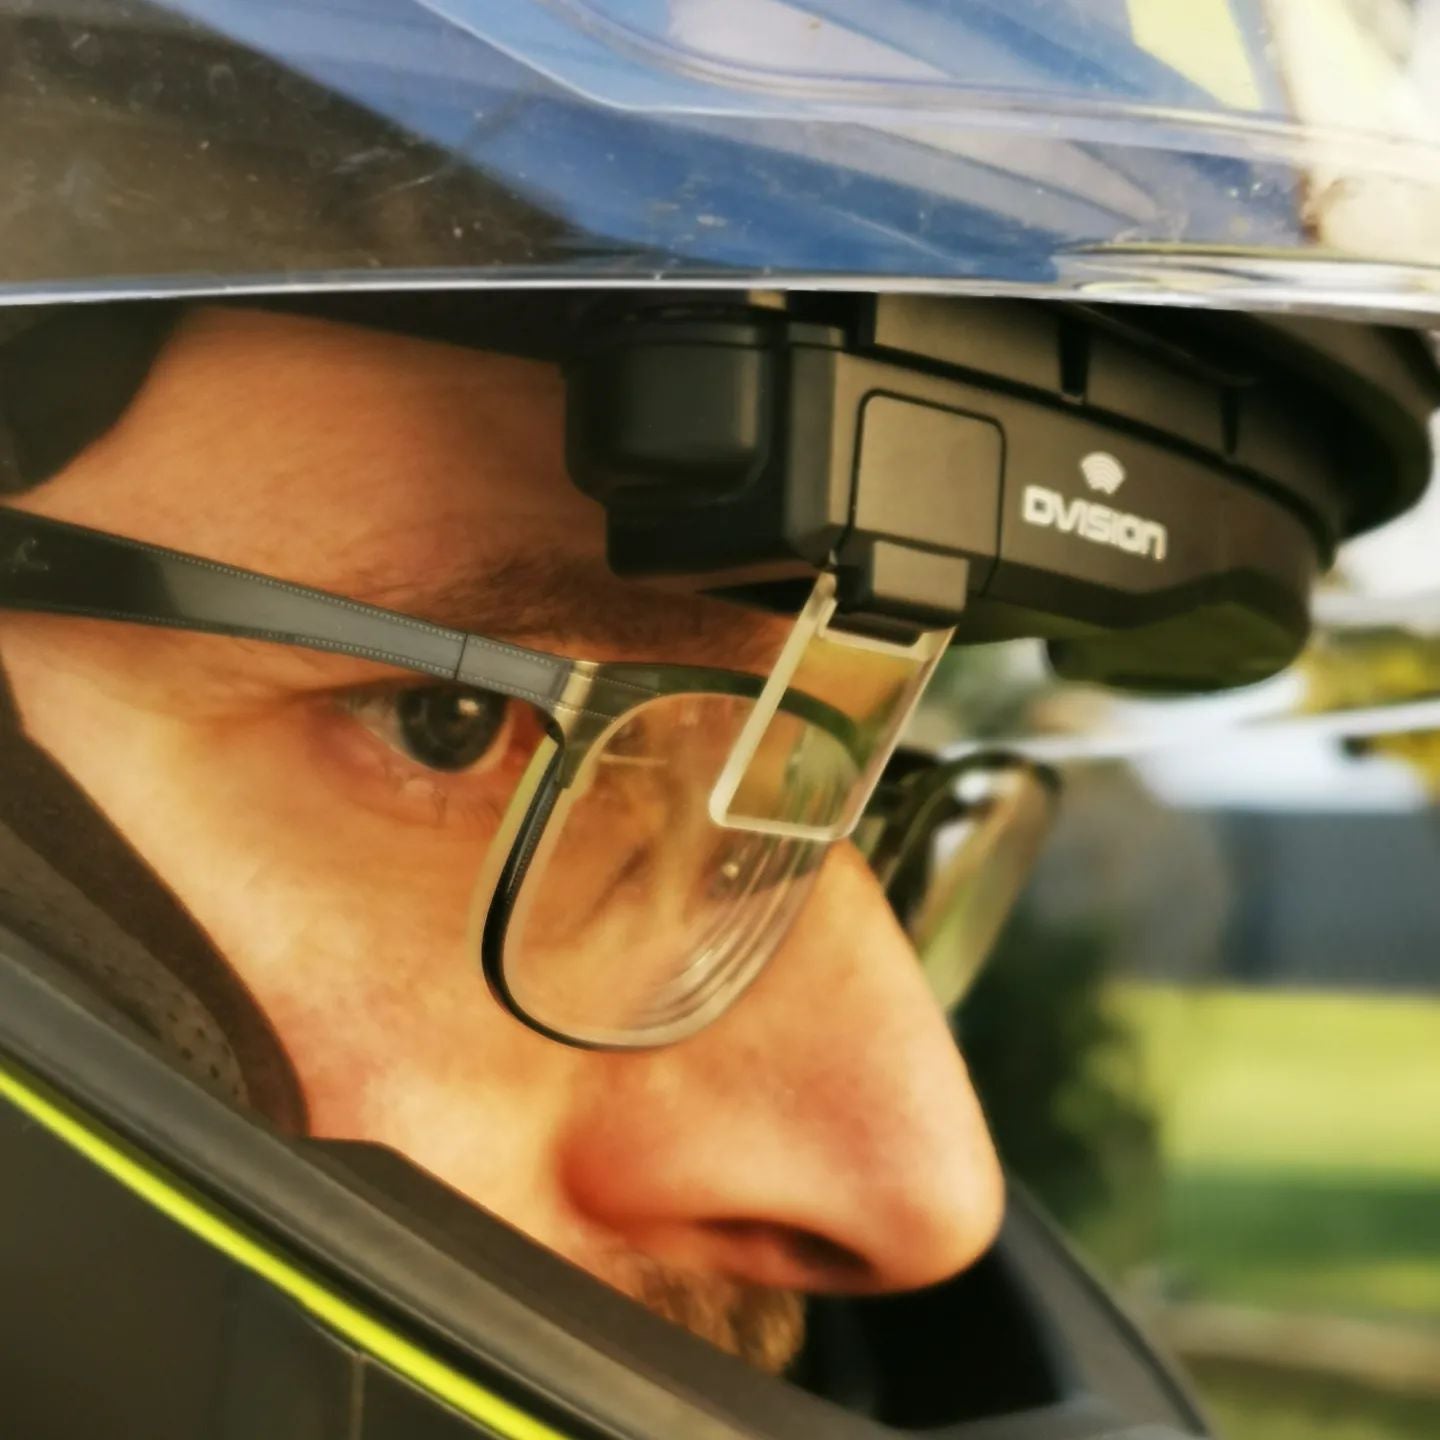 Motorcyclists who also wear glasses are not restricted by the Head Up Display and can use the HUD without any problems.